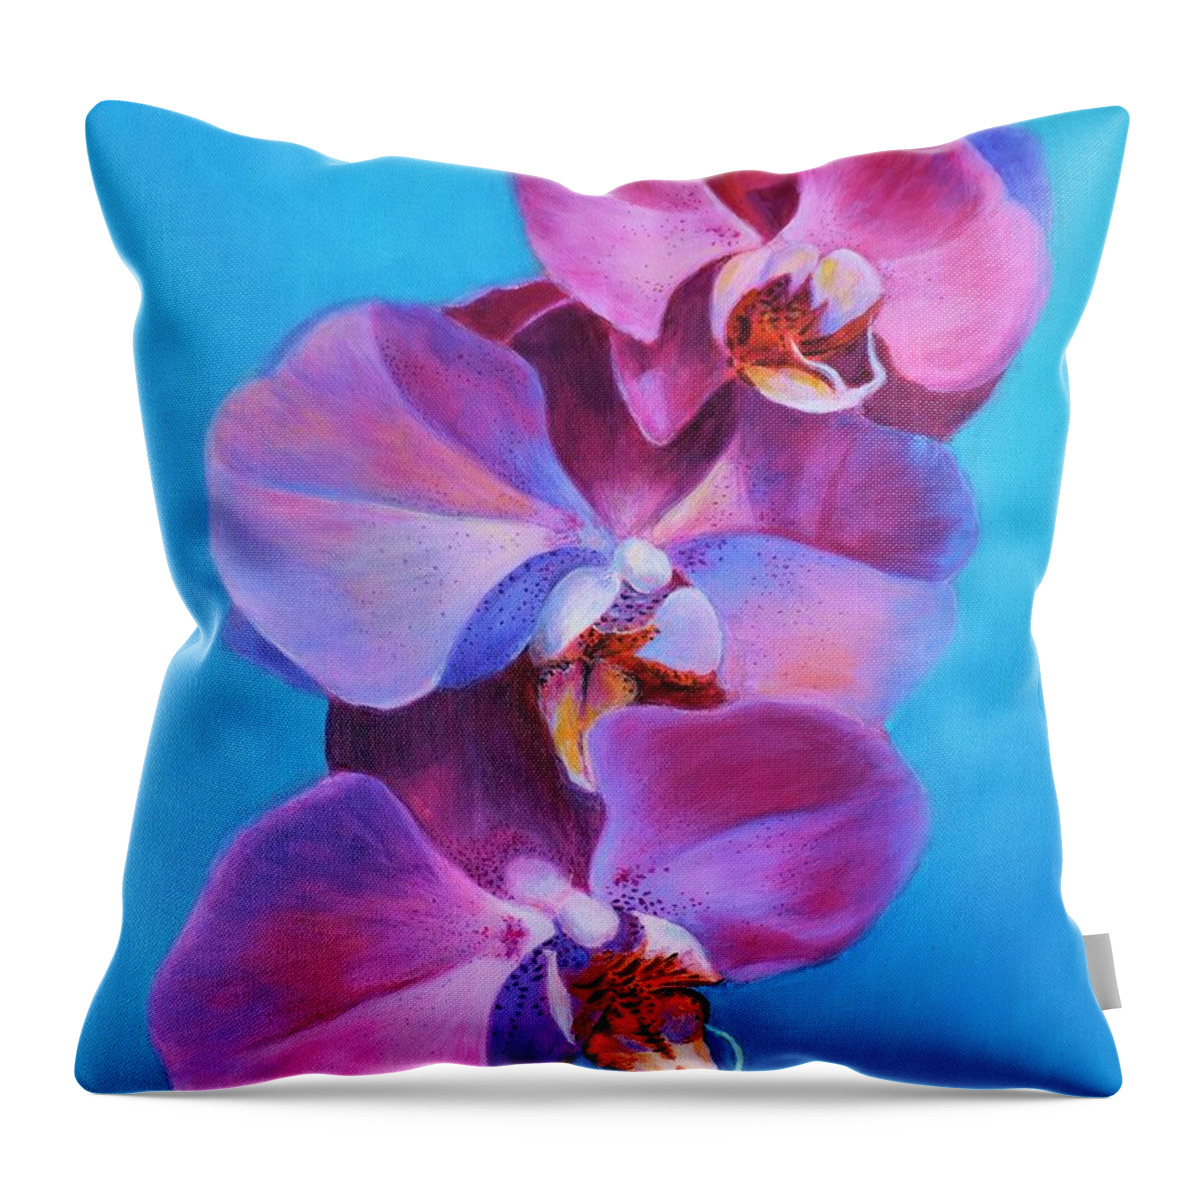 Orchids Throw Pillow featuring the painting Orchid Love by Vina Yang